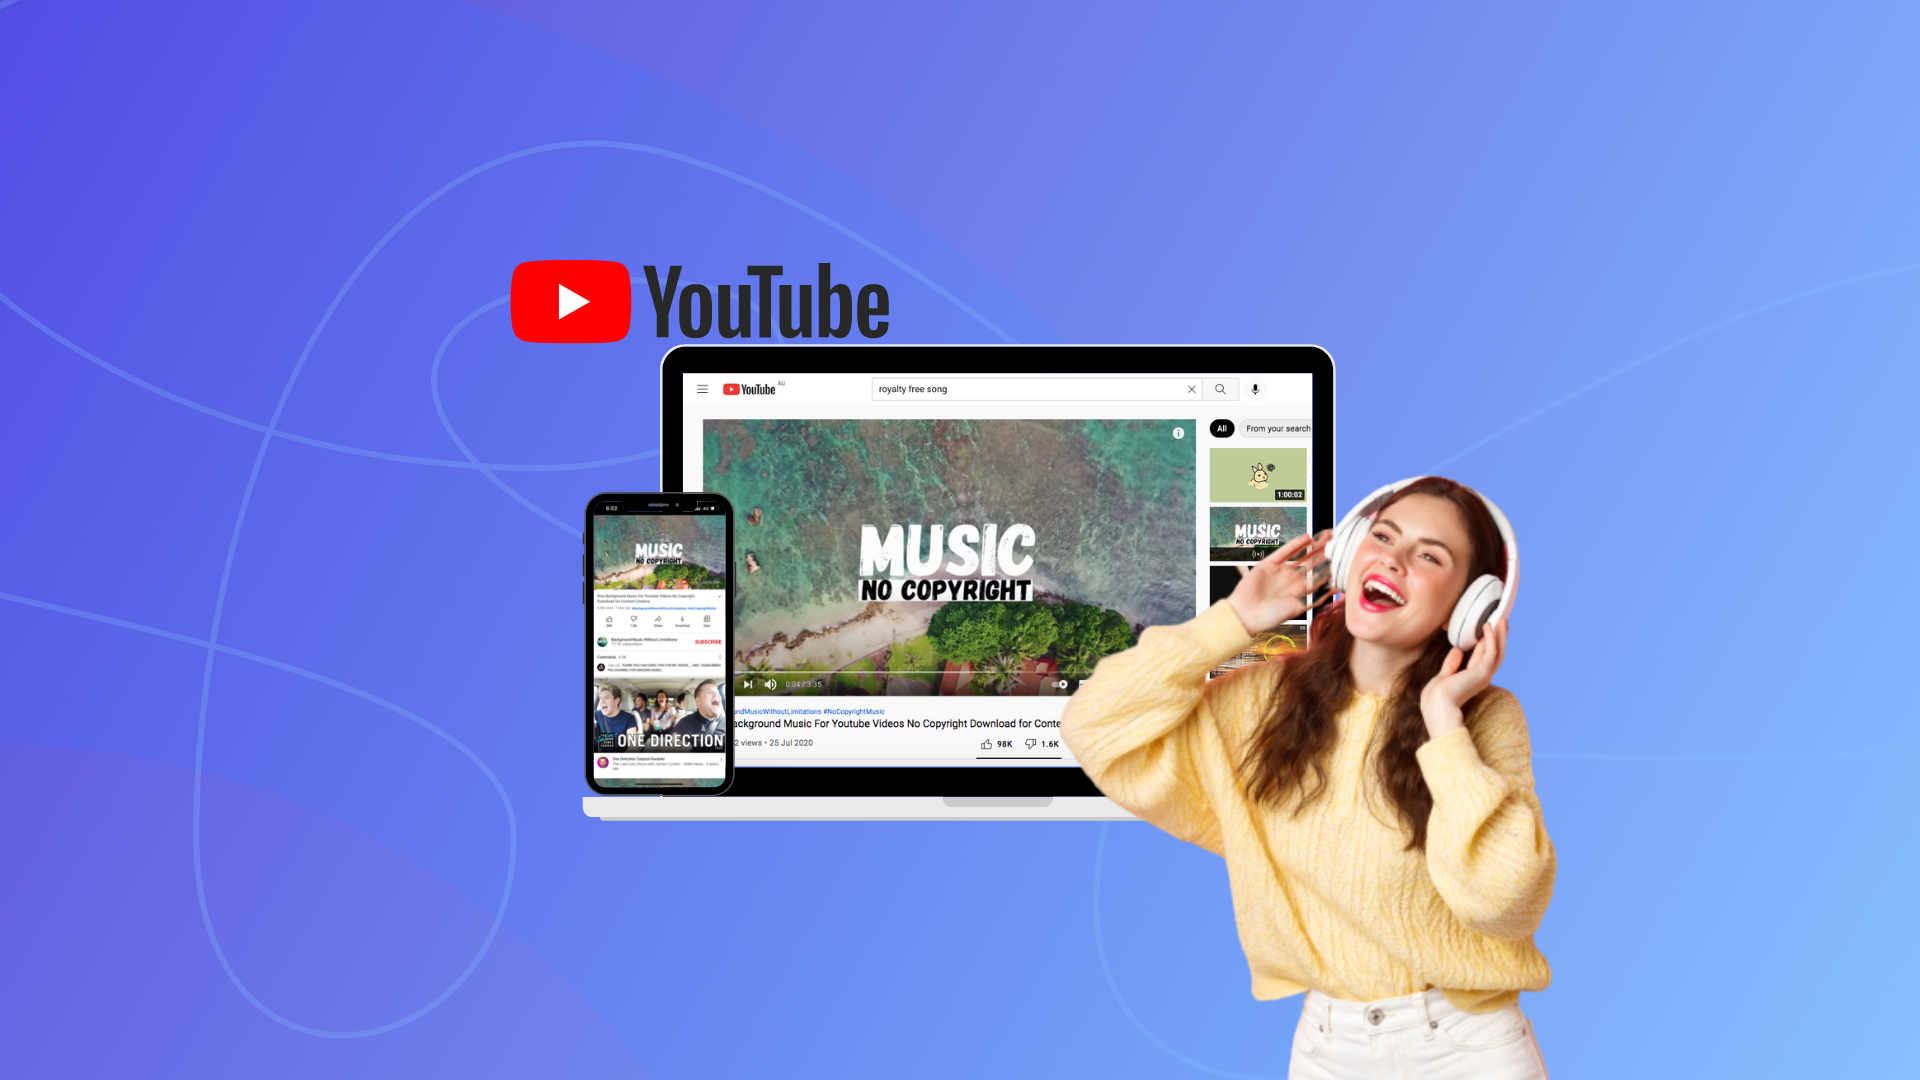 Image of downloading a music video on YouTube with girl singing with headphones.  